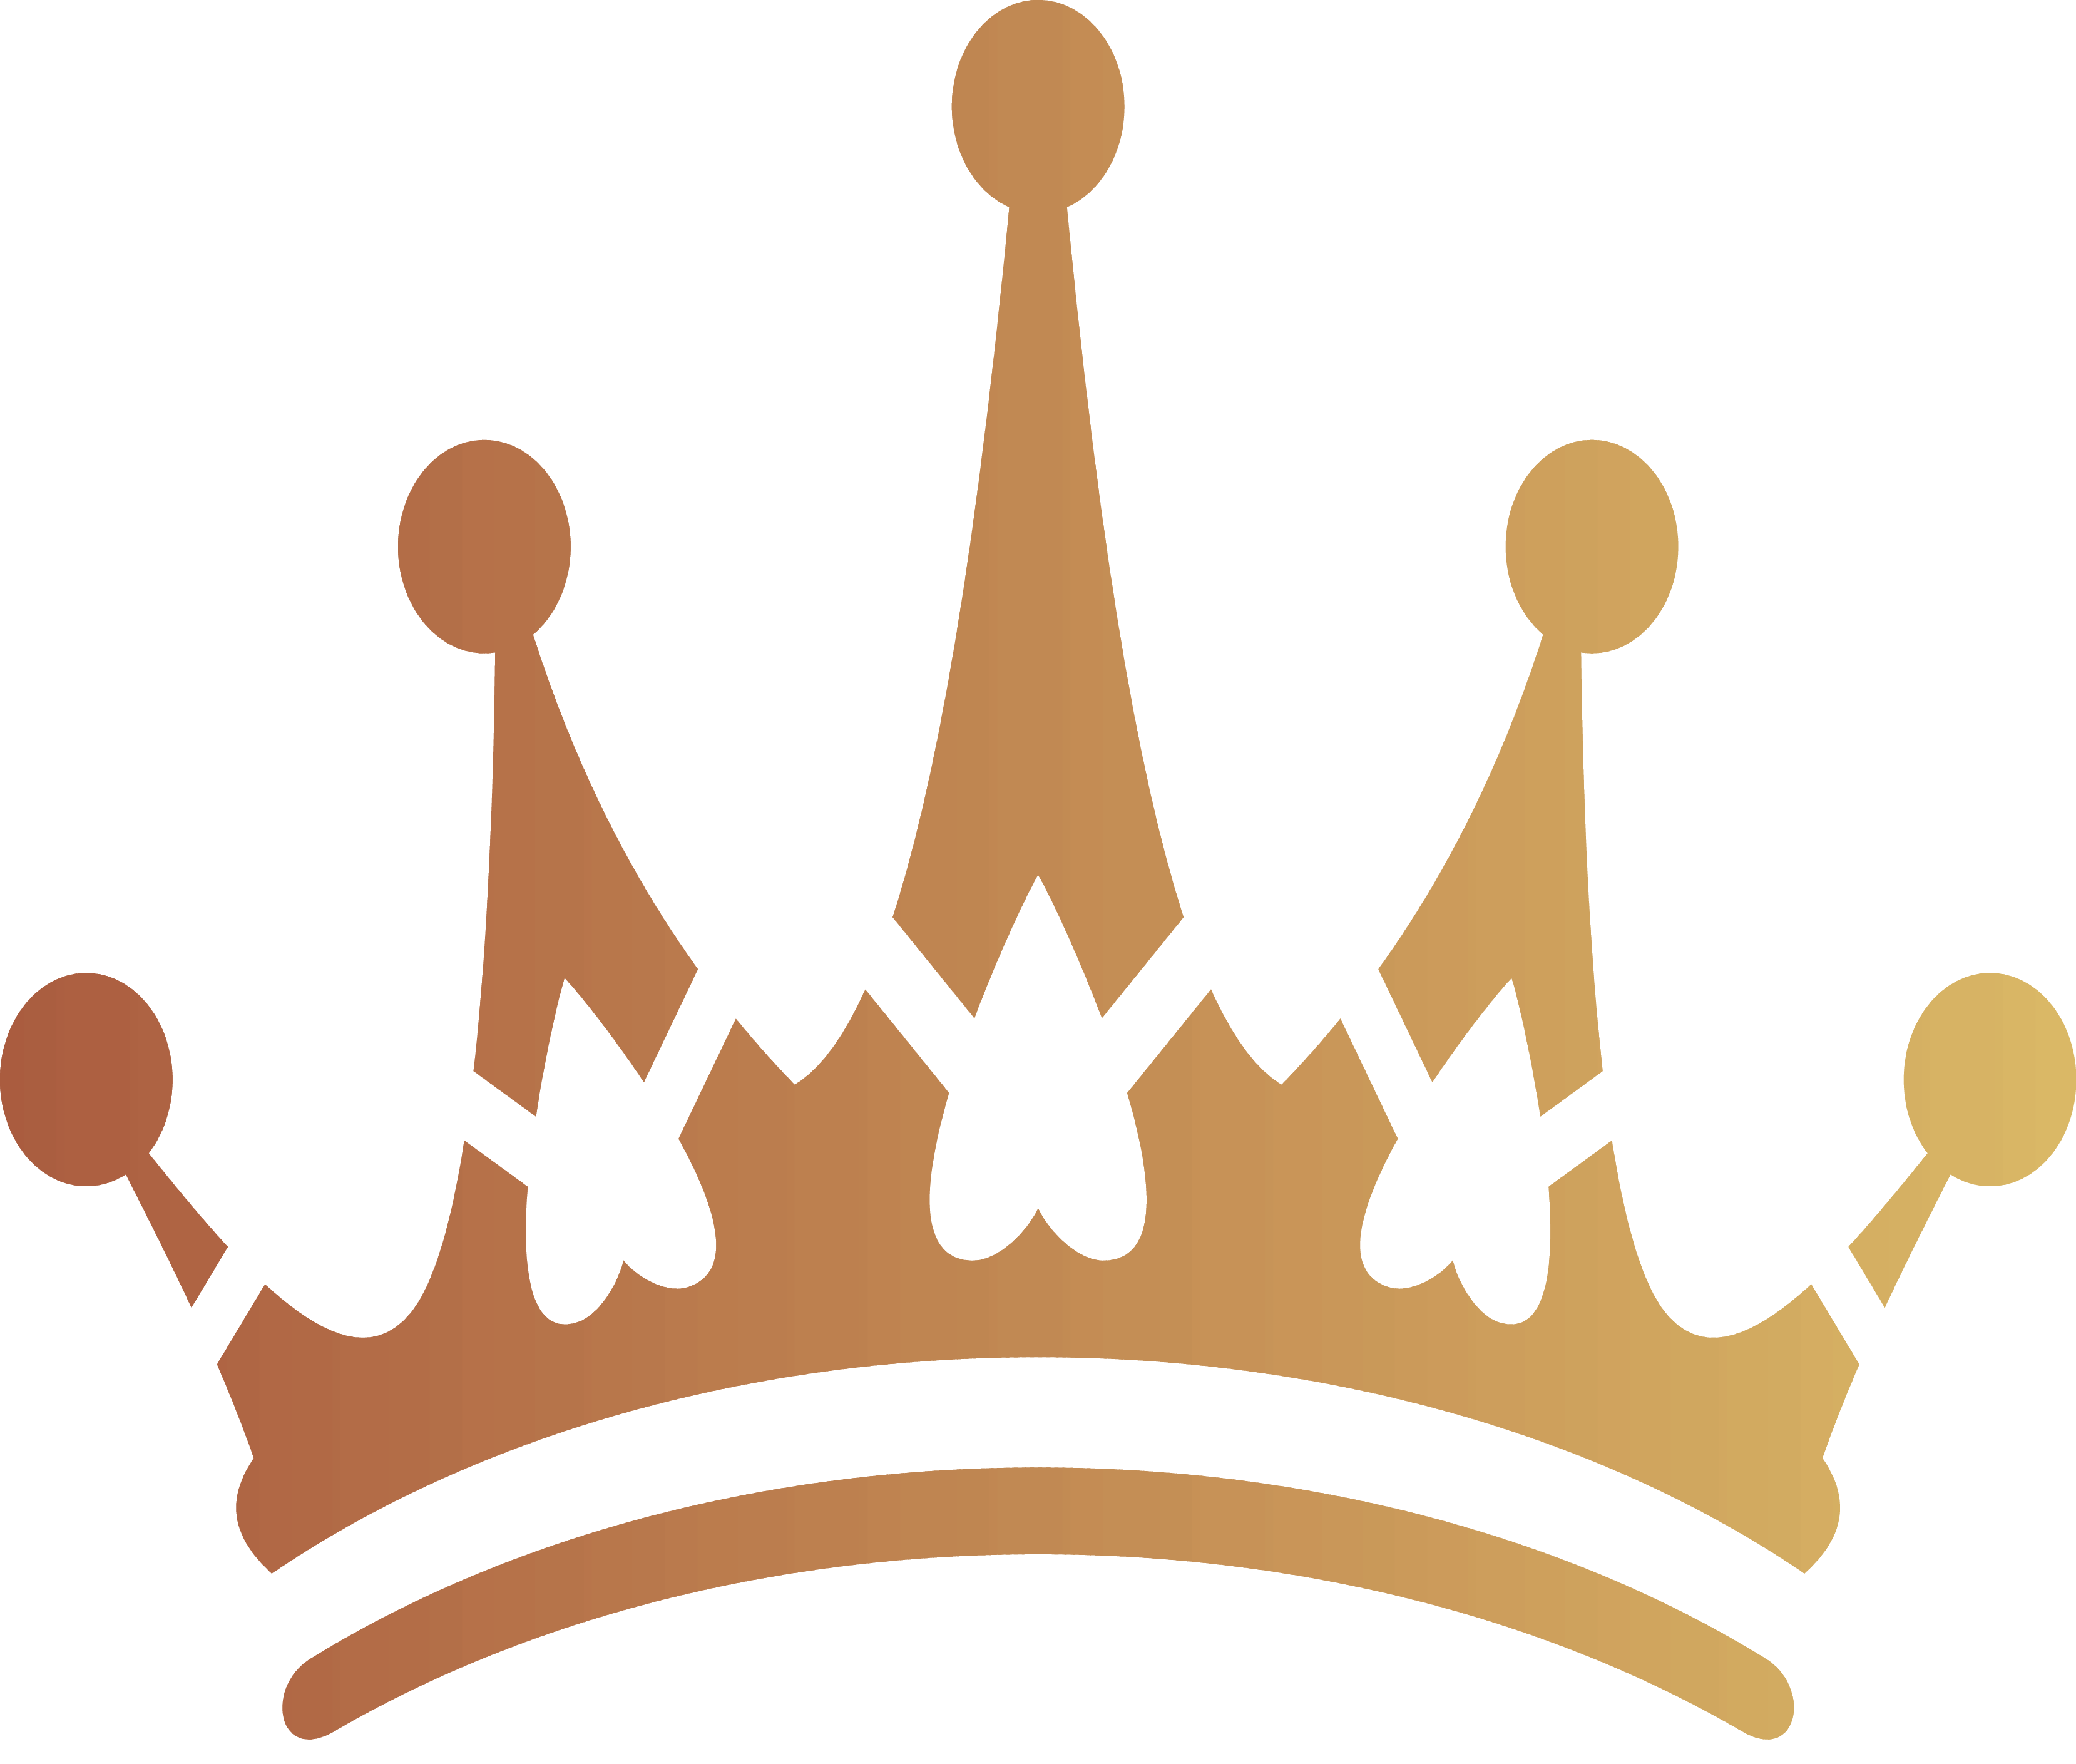 Crown logo hand drawn icon on transparent background PNG - Similar PNG